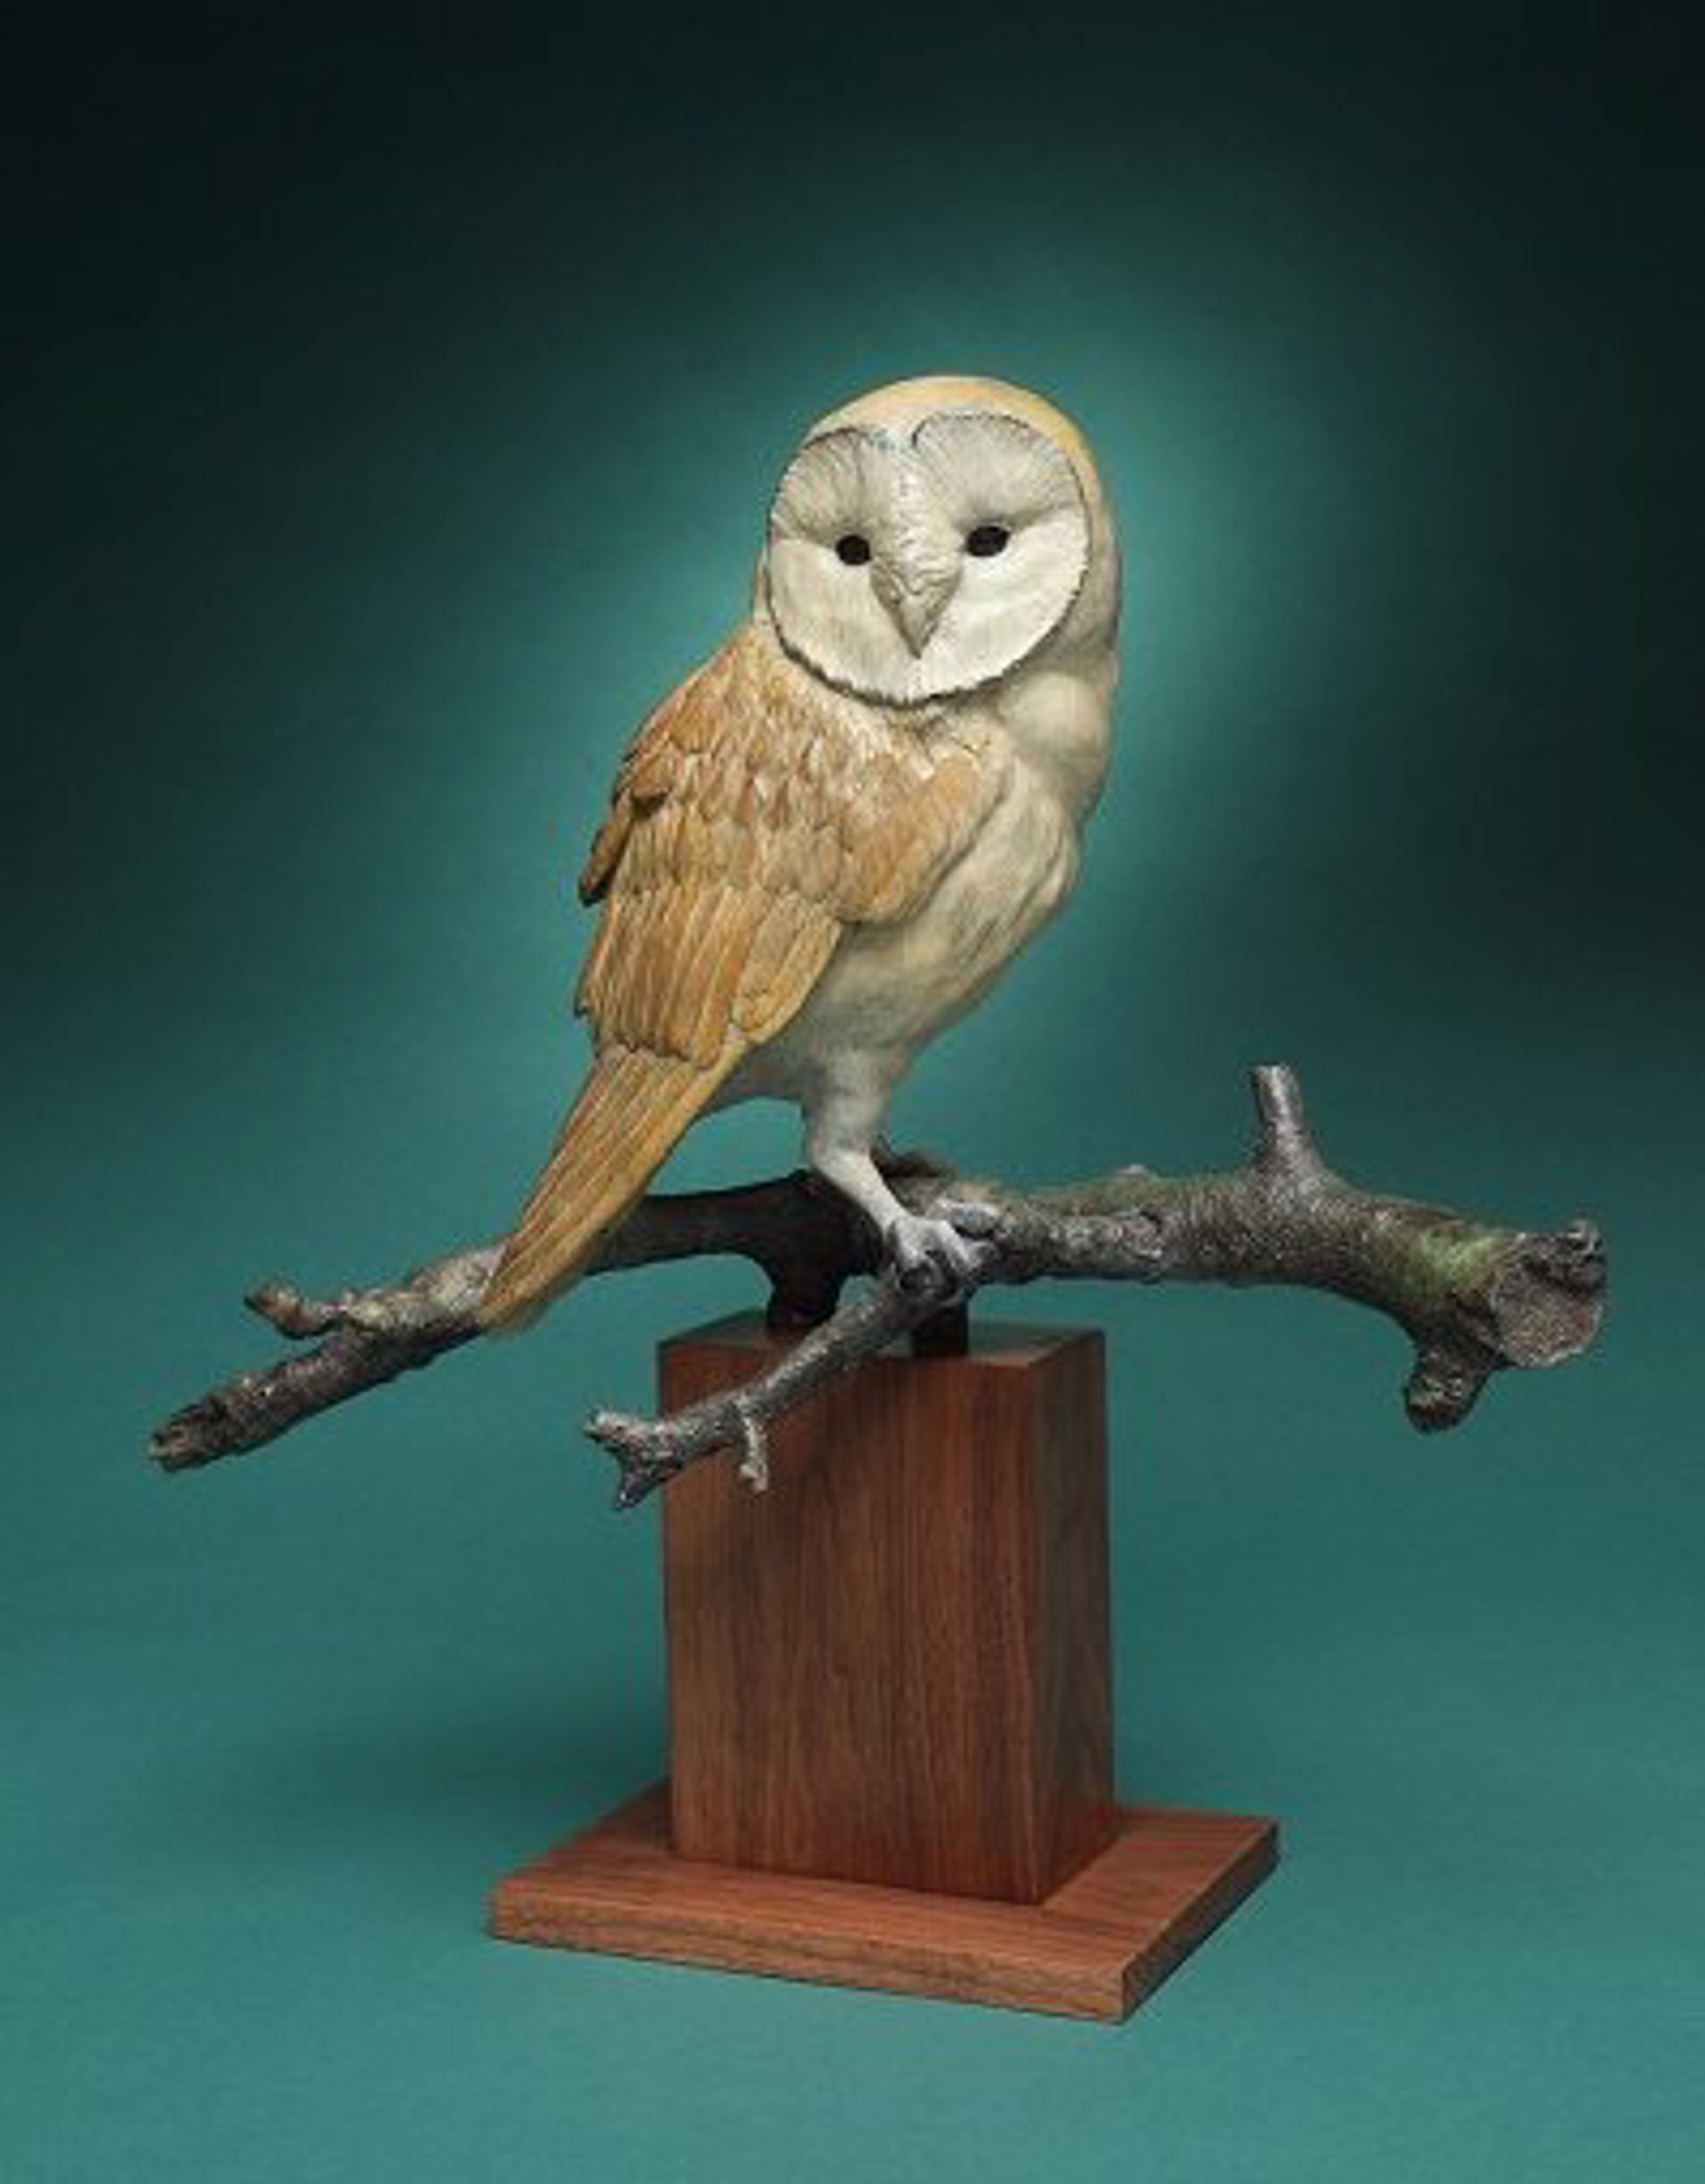 Barn Owl by Melissa Cooper